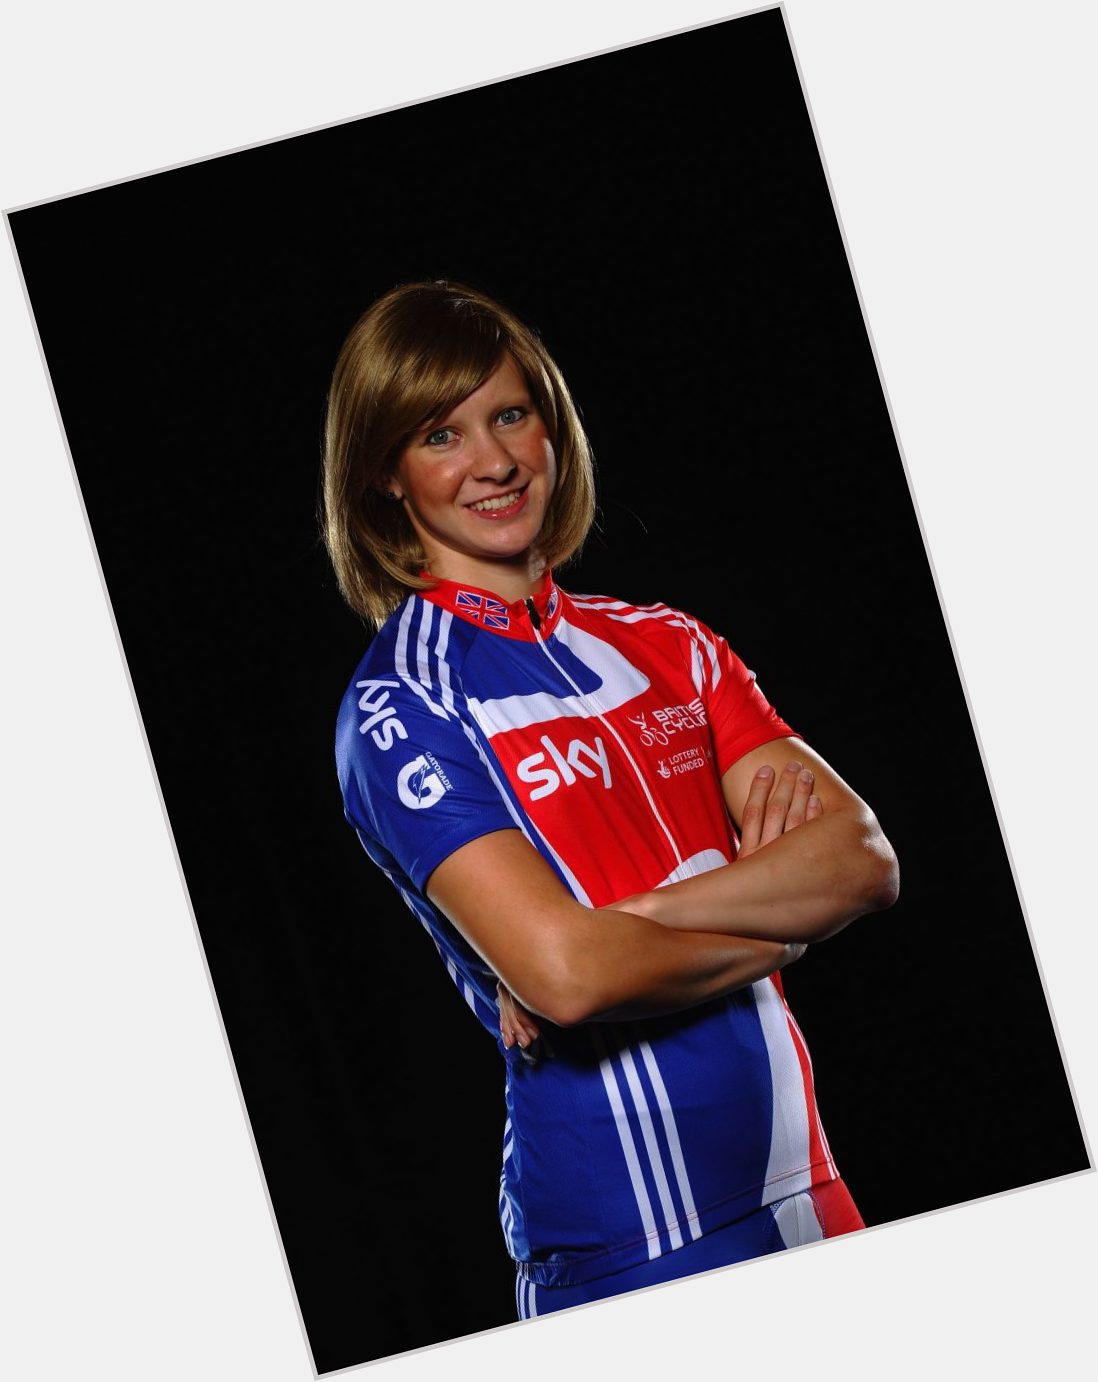 who is Joanna Rowsell 10